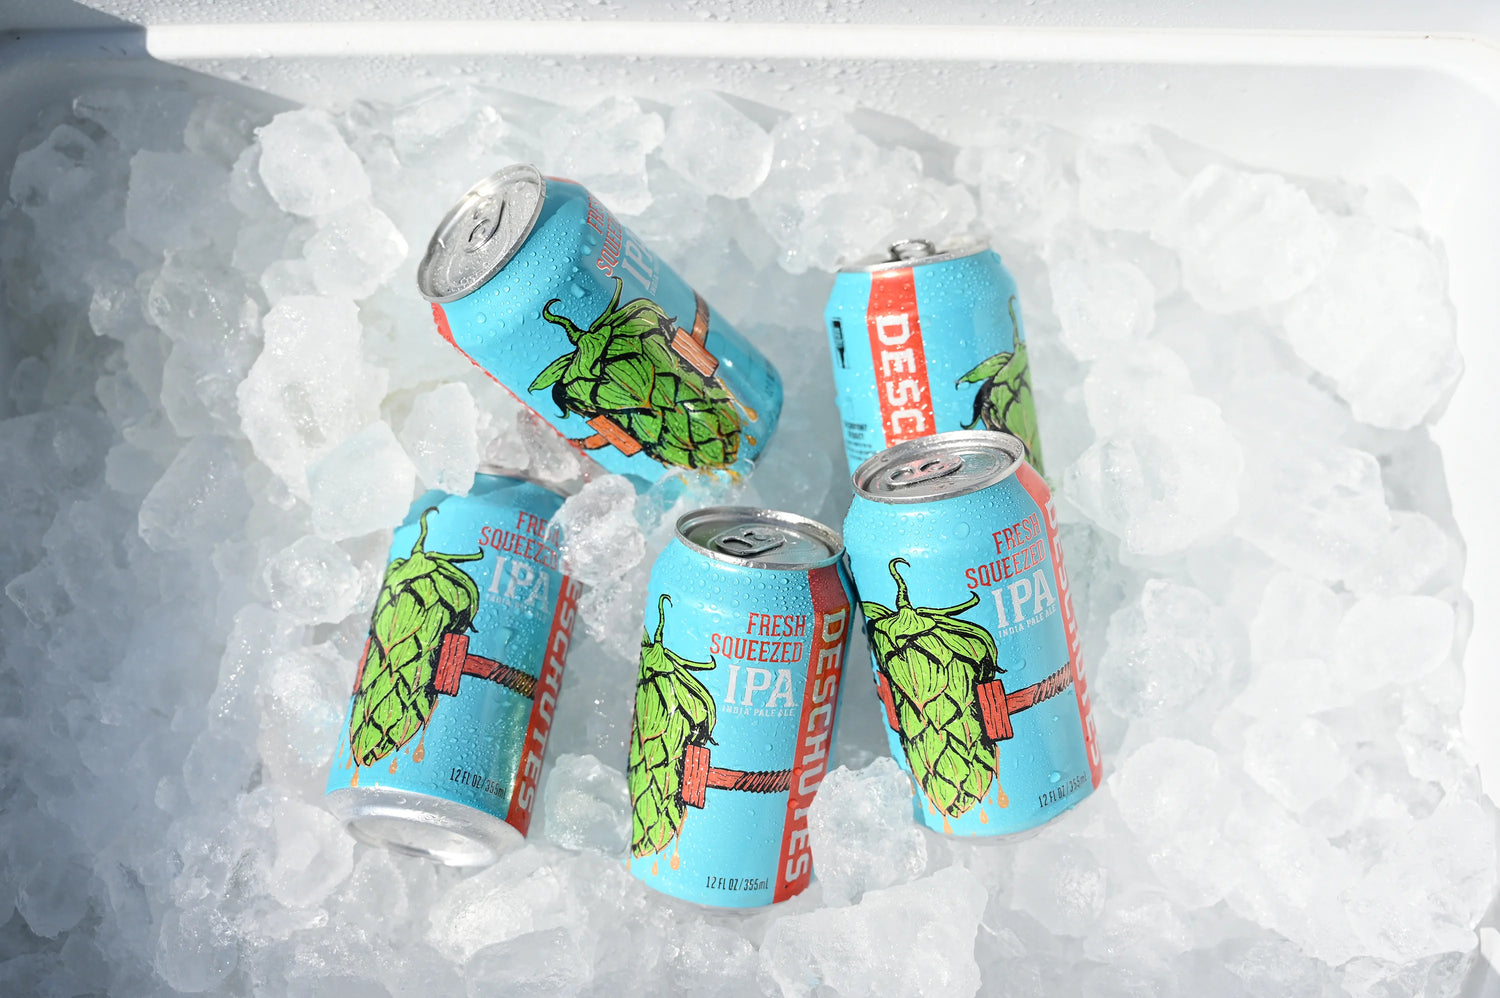 A photograph of six Fresh Squeezed cans in a cooler with ice.